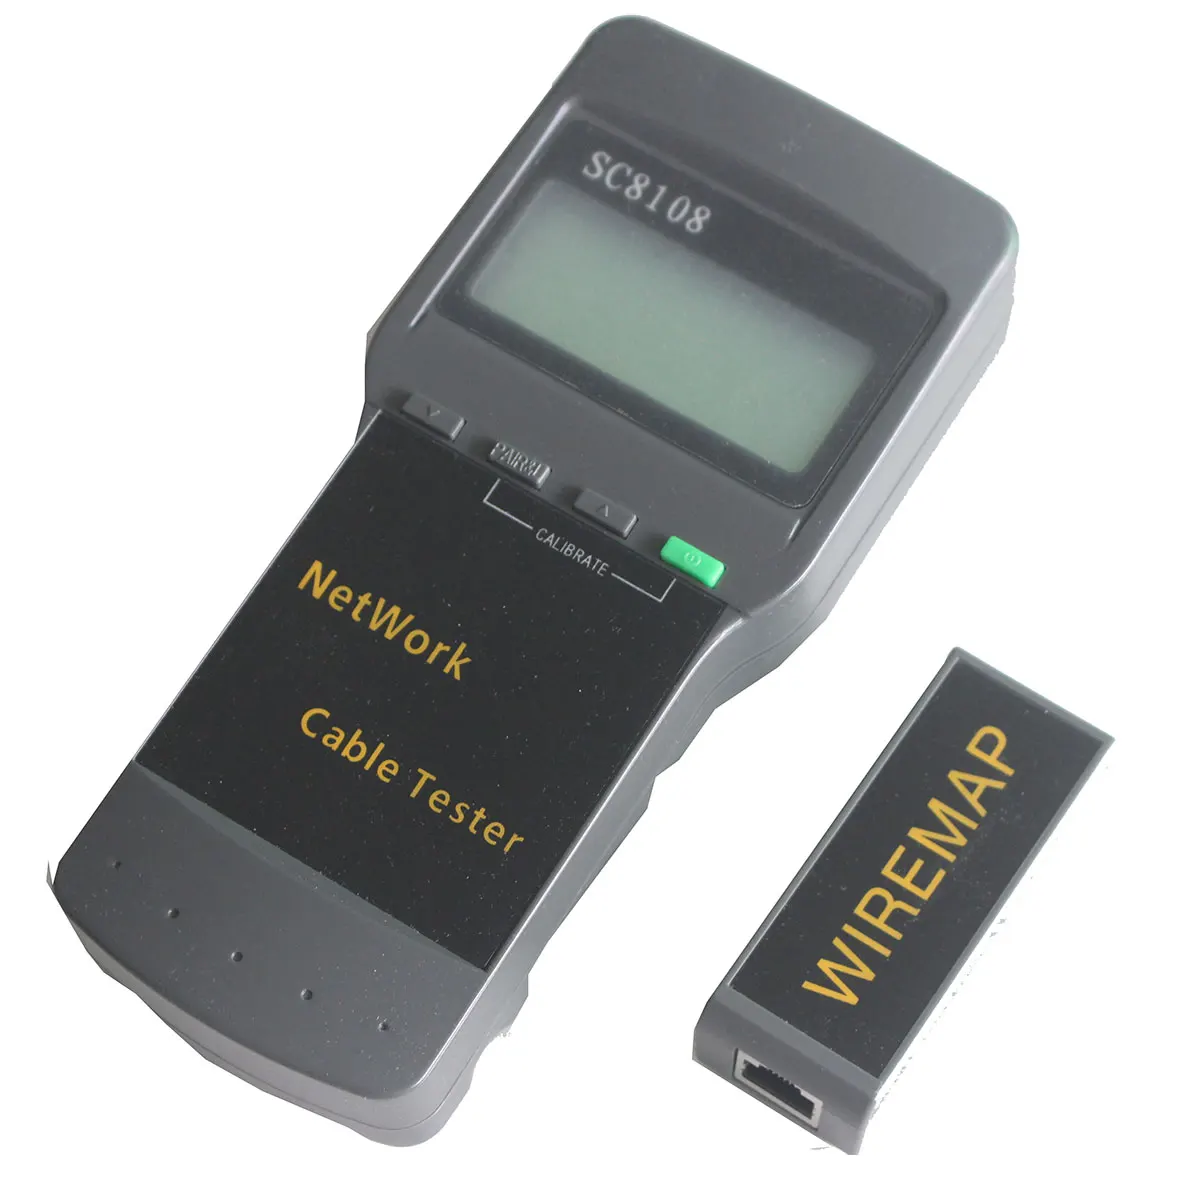 

SC8108 Portable NetworkTester &LAN Phone Cable Tester Meter With LCD Display RJ45 Cat5e Cat6 UTP